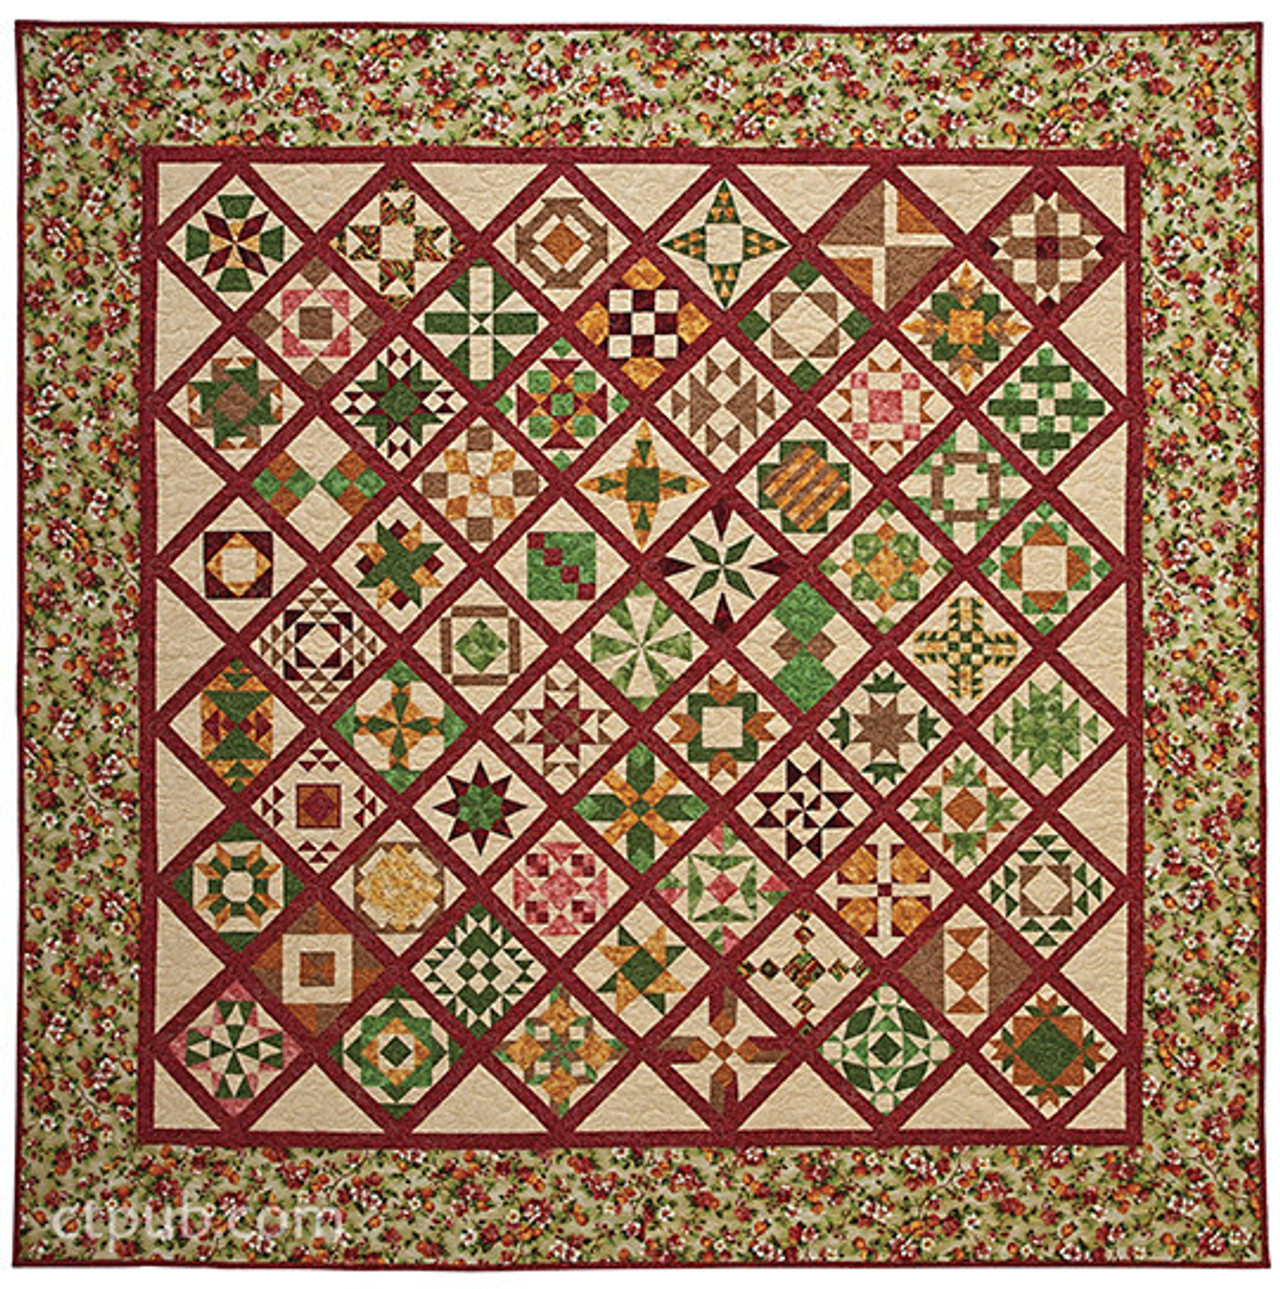 The Loyal Union Sampler from Elm Creek Quilts: 121 Traditional Blocks ...